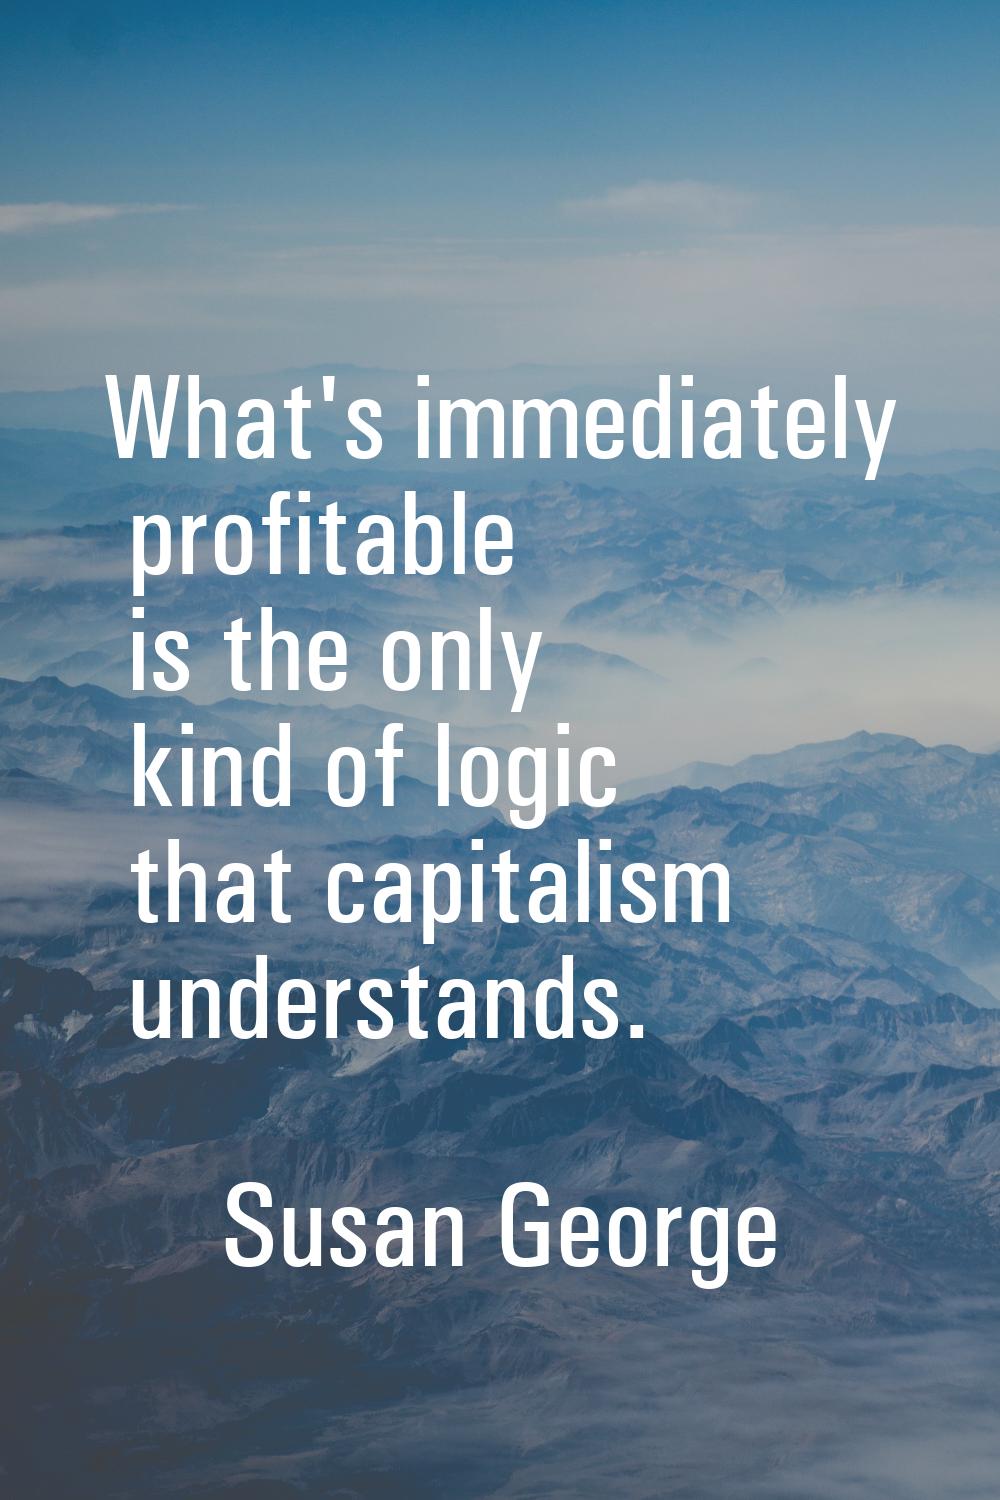 What's immediately profitable is the only kind of logic that capitalism understands.